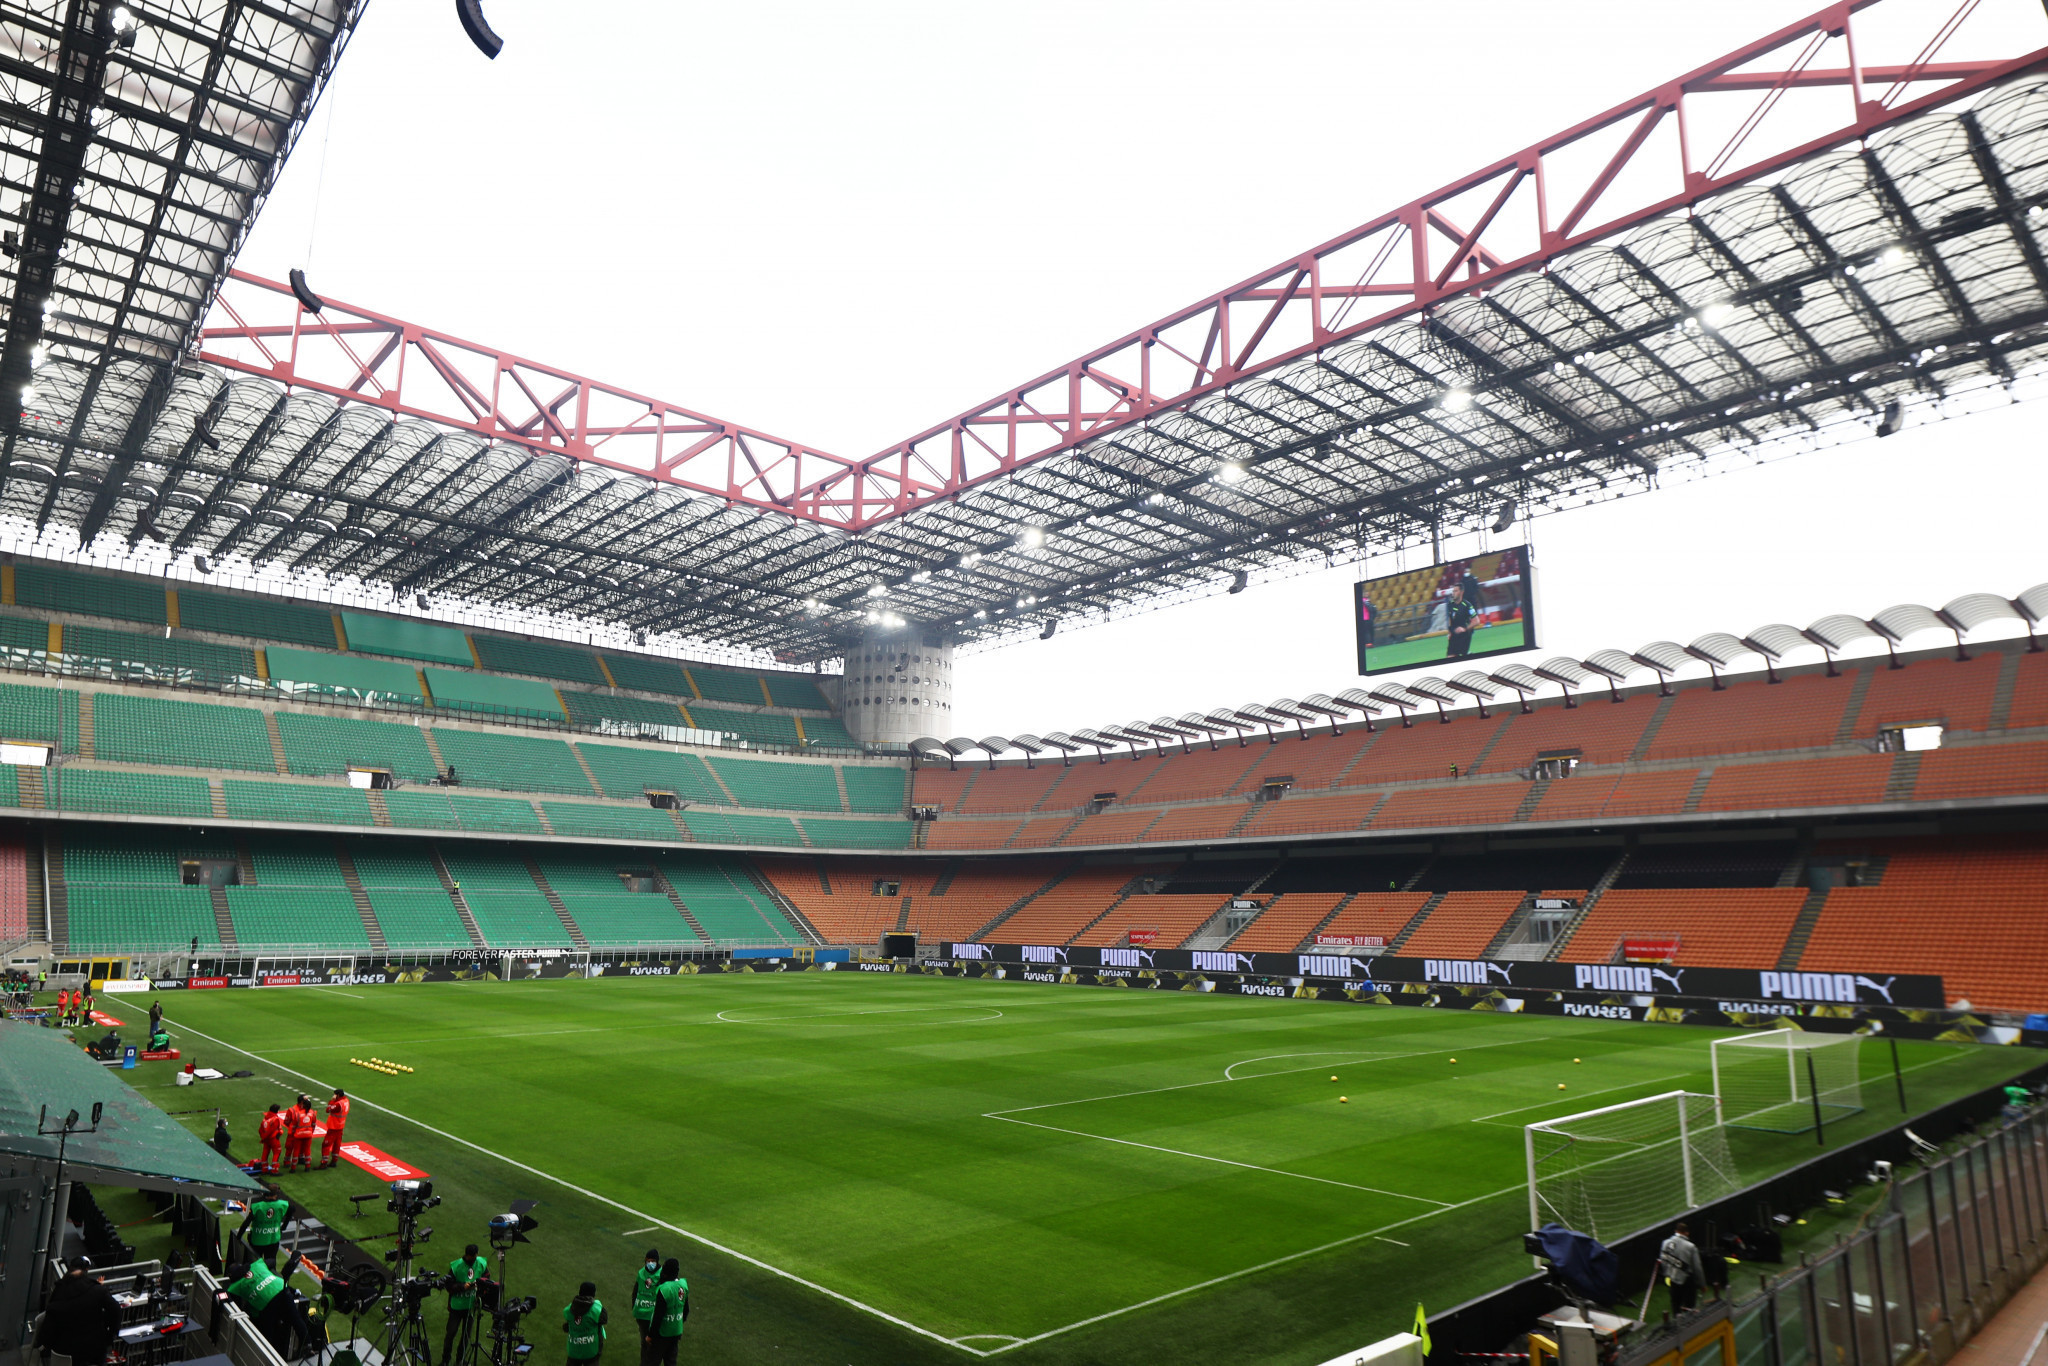 Council leaders give approval for new San Siro development prior to Milan Cortina 2026